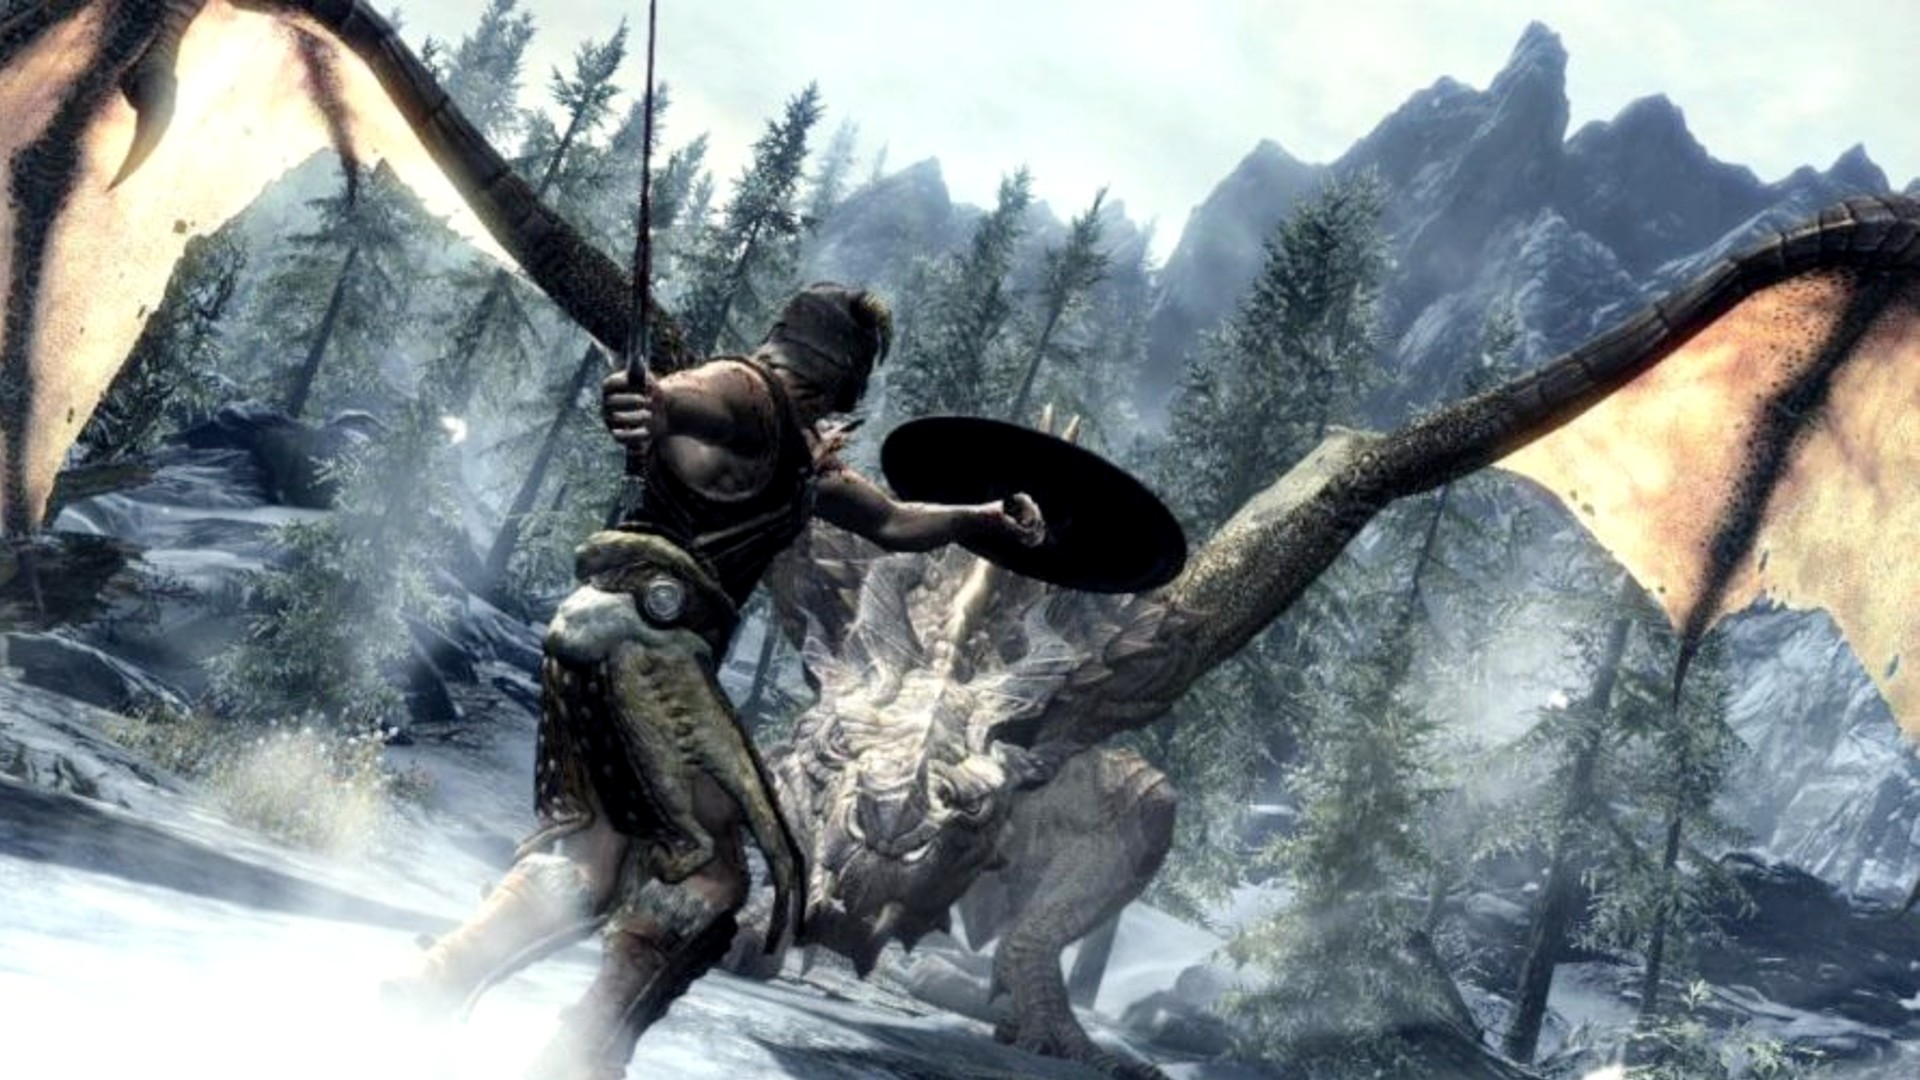 Best RPG games: Skyrim. Image shows someone getting ready to fight a dragon in a snowy environment.